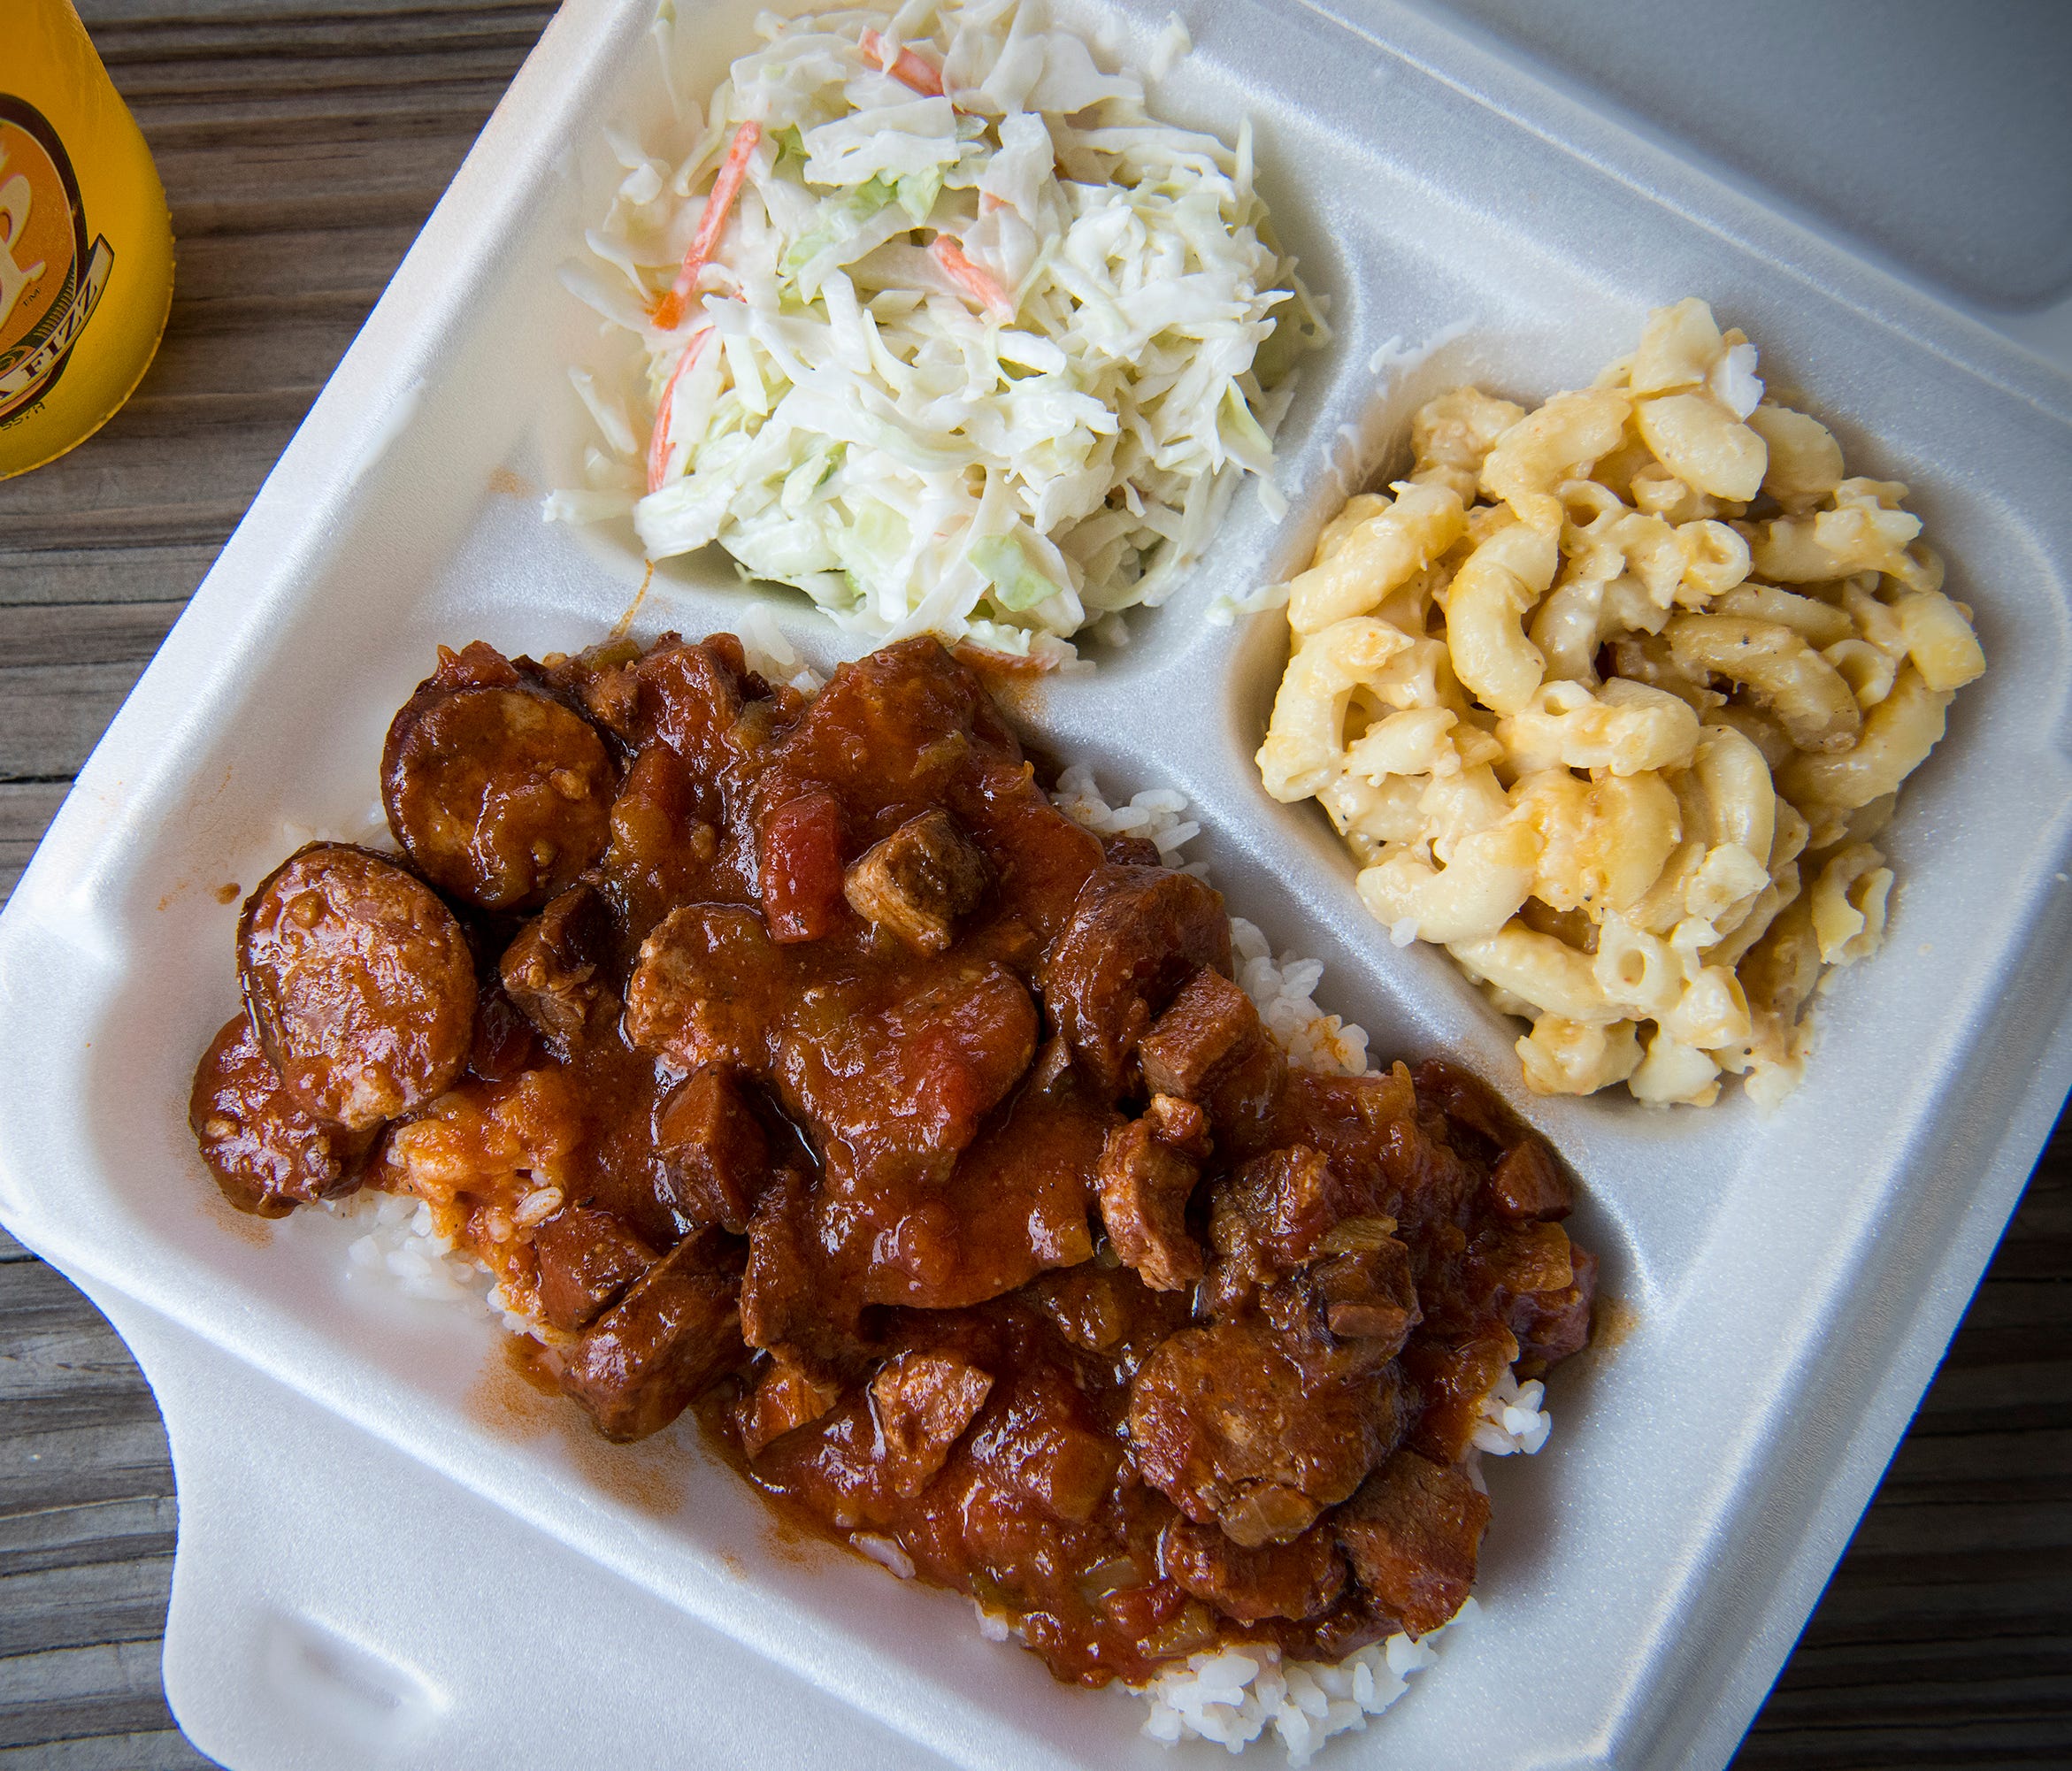 A crowd pleaser in these parts is the popular plate lunch, consisting of a main entree and two sides. In this case it's a serving of smoked sausage and tasso in red sauce over rice with sides of coleslaw and mac and cheese at Johnson's Boucaniere.